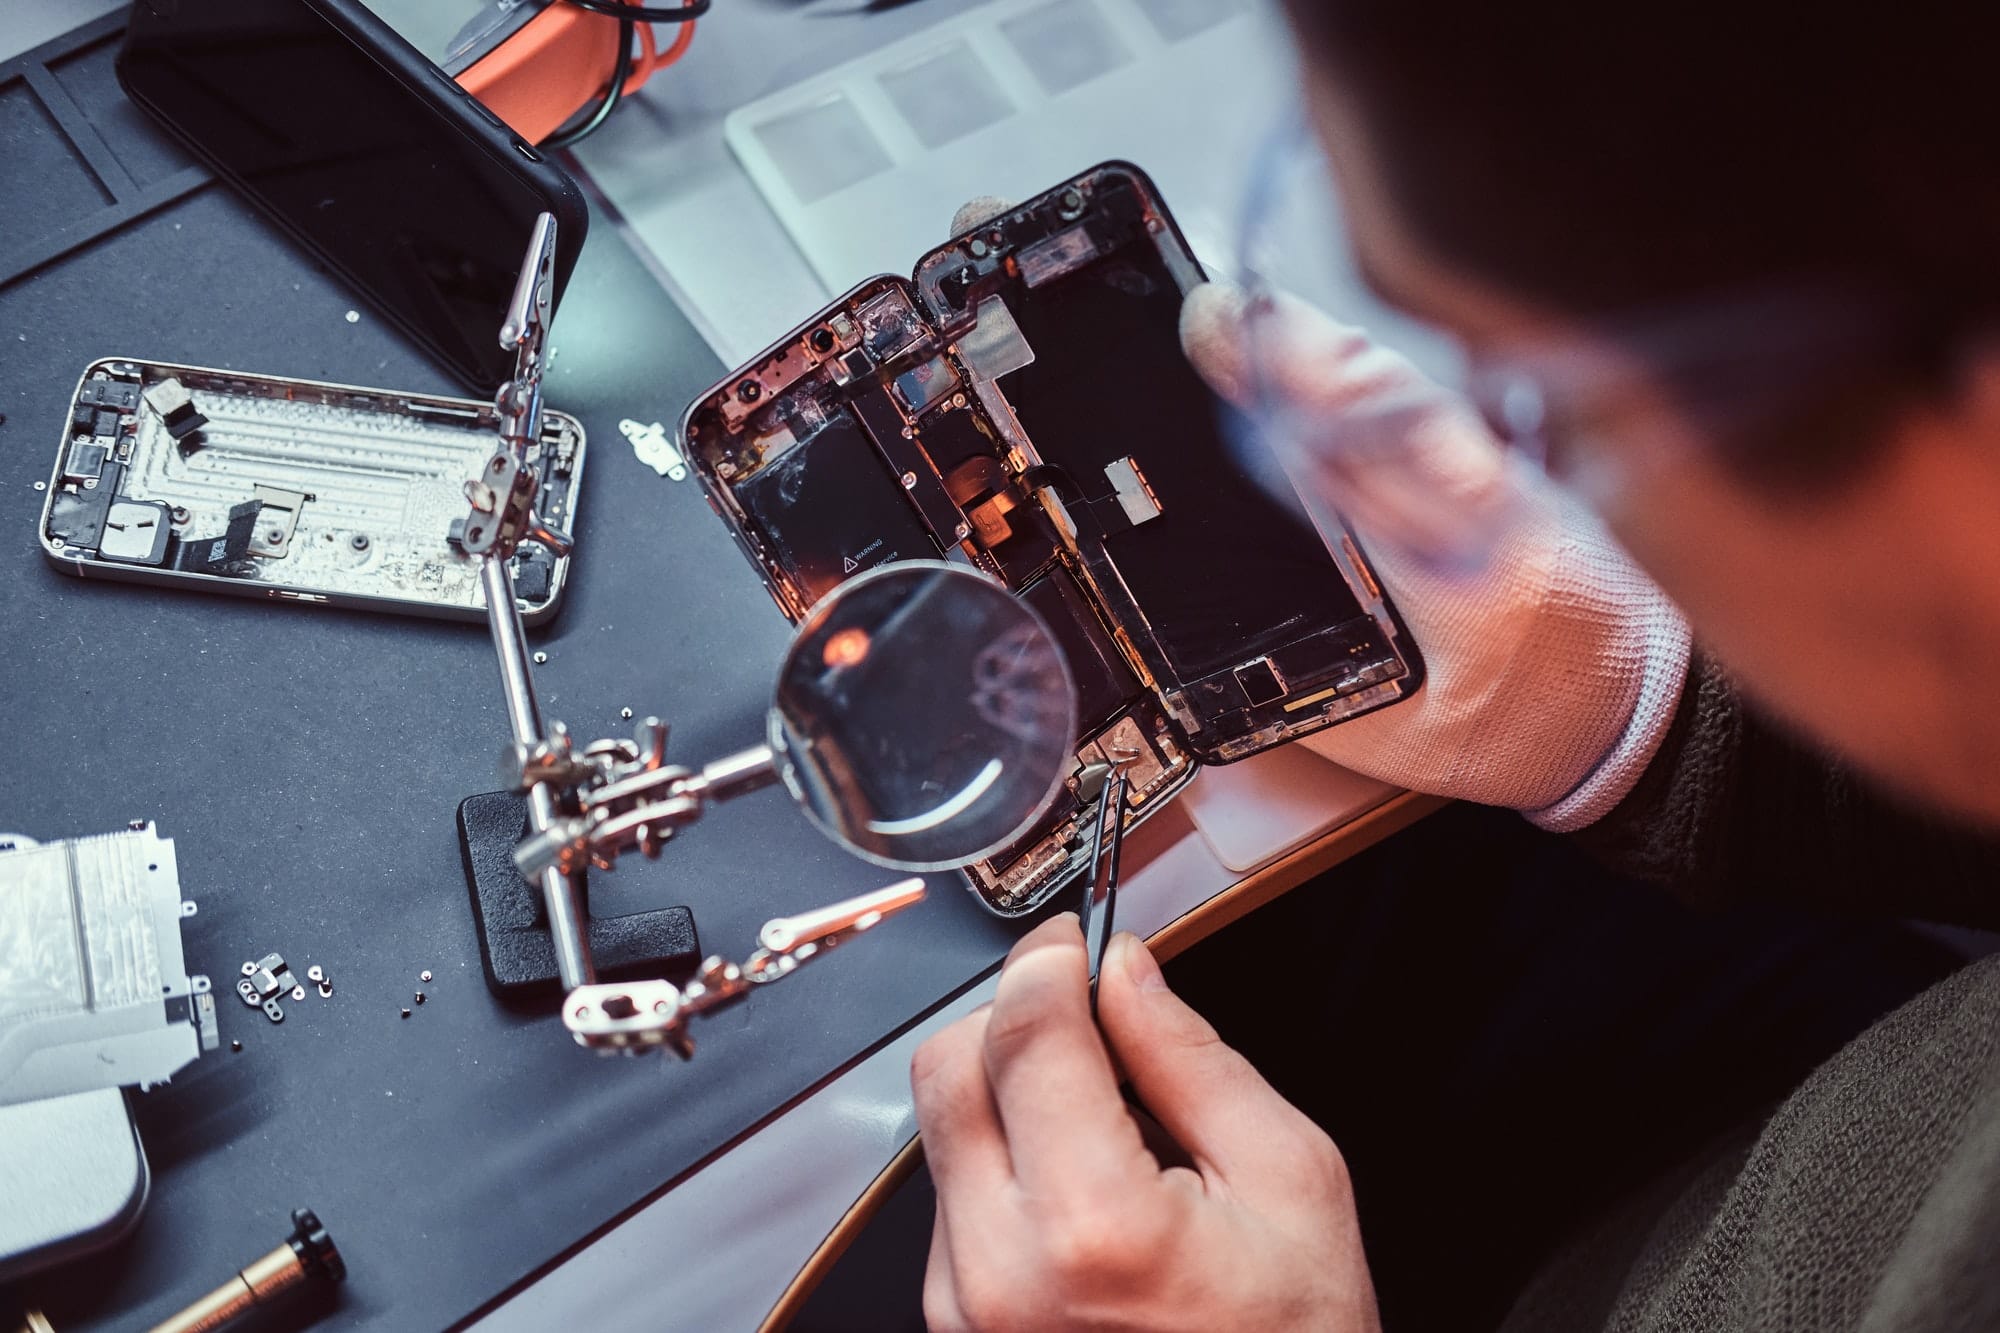 Technician carefully inspect the internal parts of the smartphone in a modern repair shop